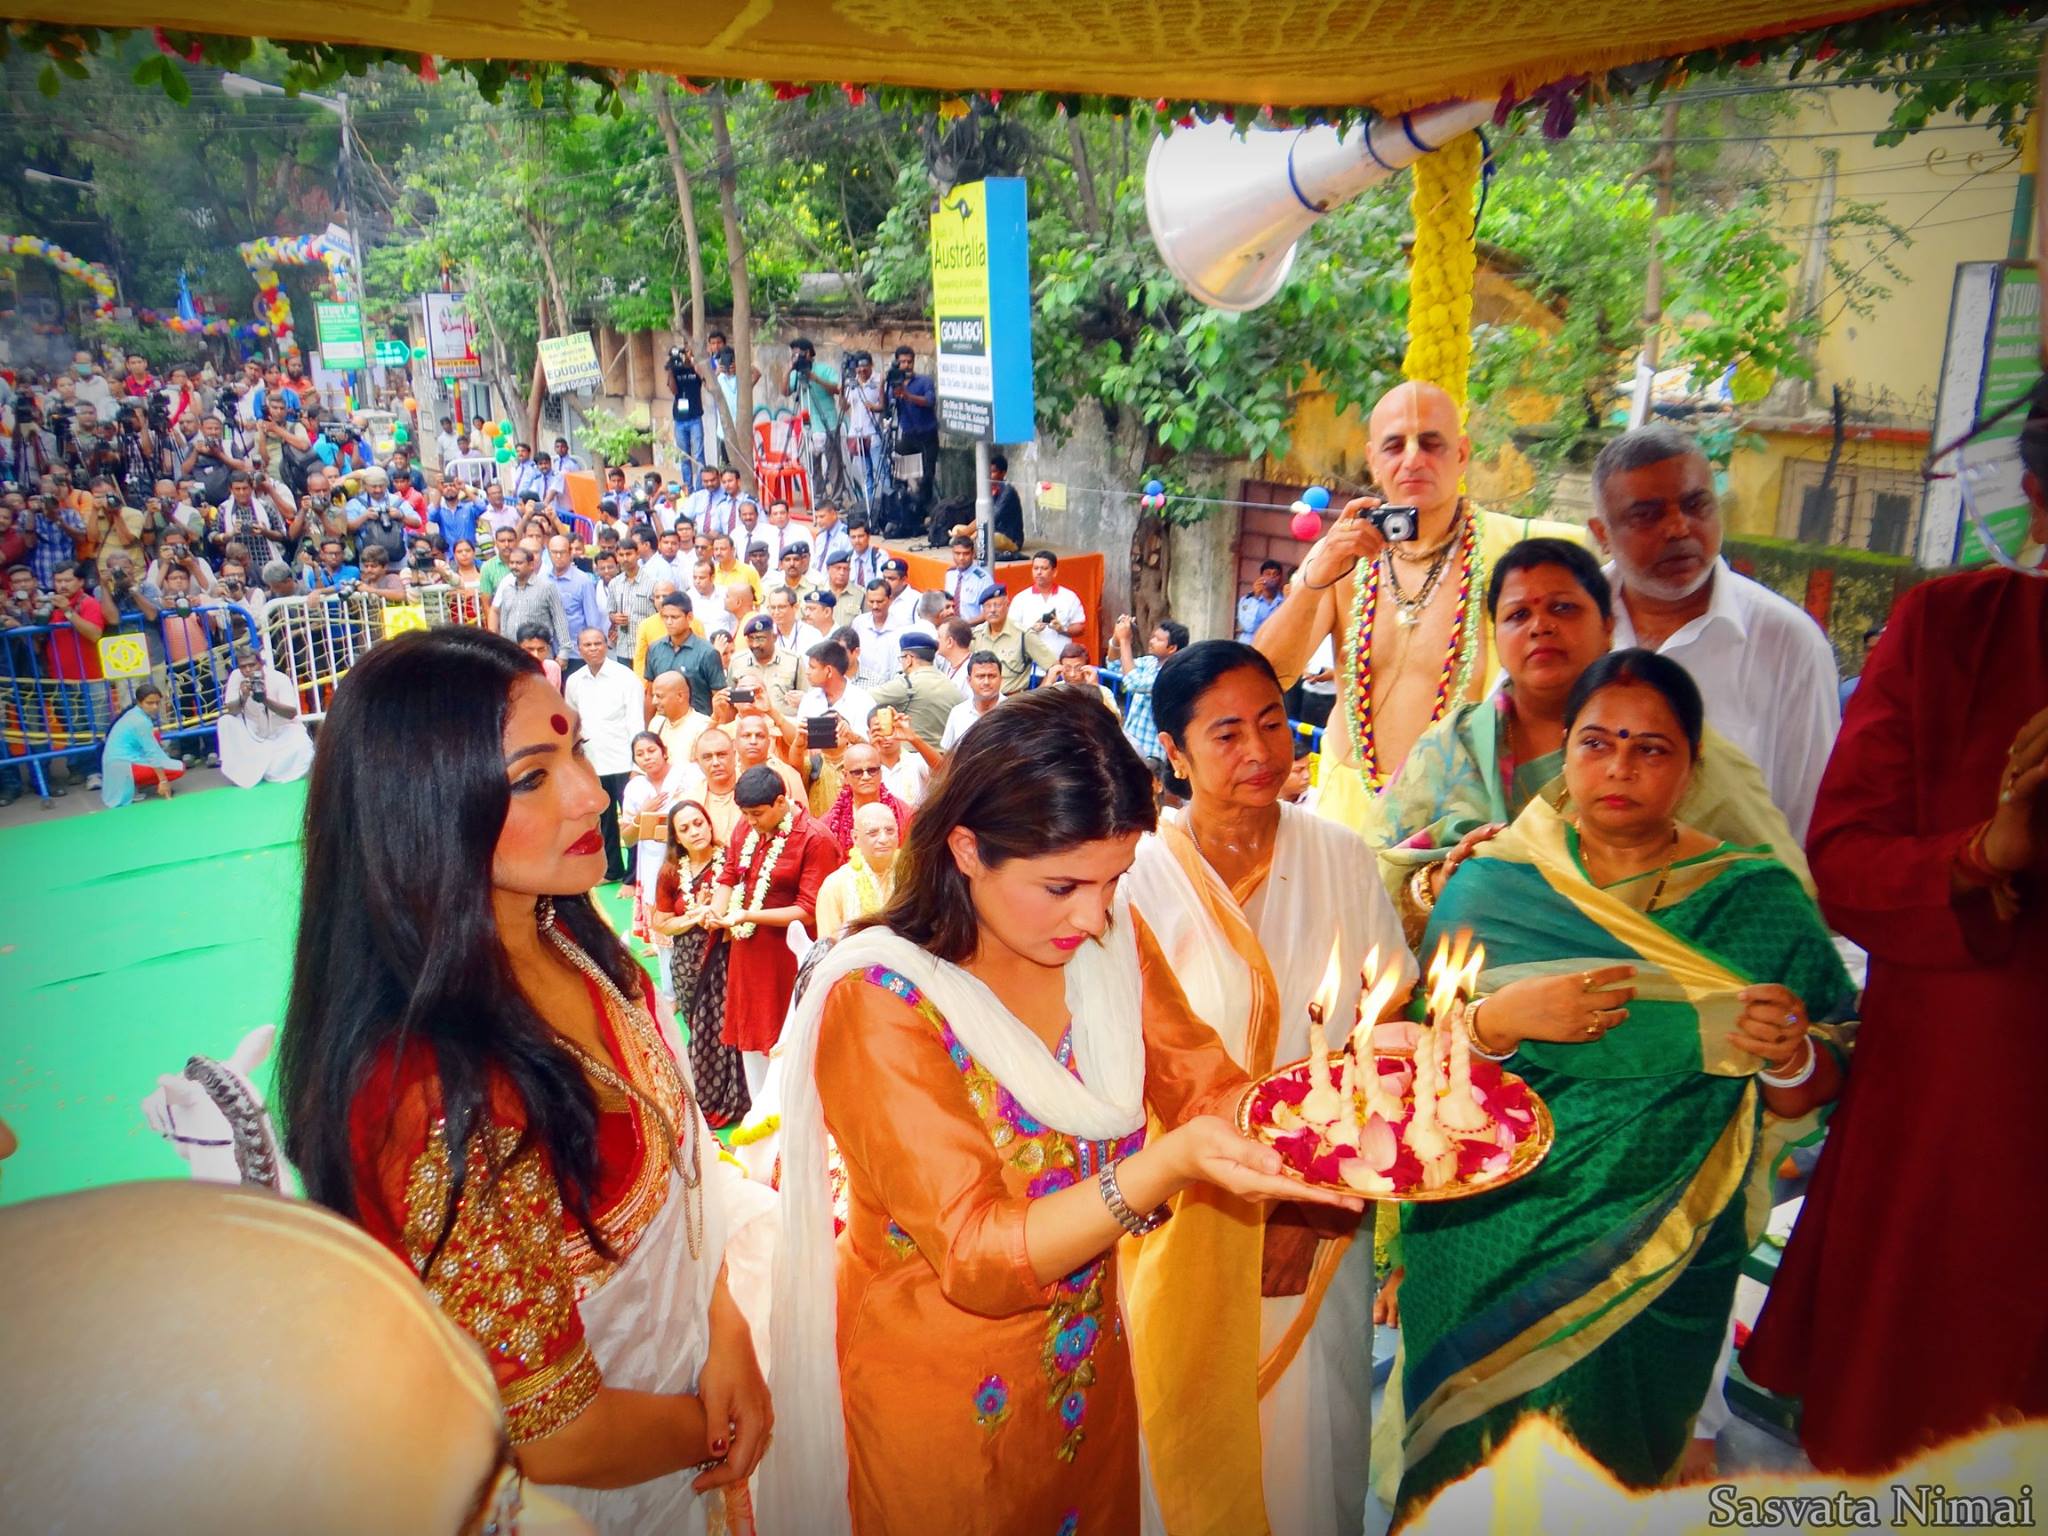 Bengal celebrates Rath Yatra offering prayers to Lord Jagannath | Central Chronicle